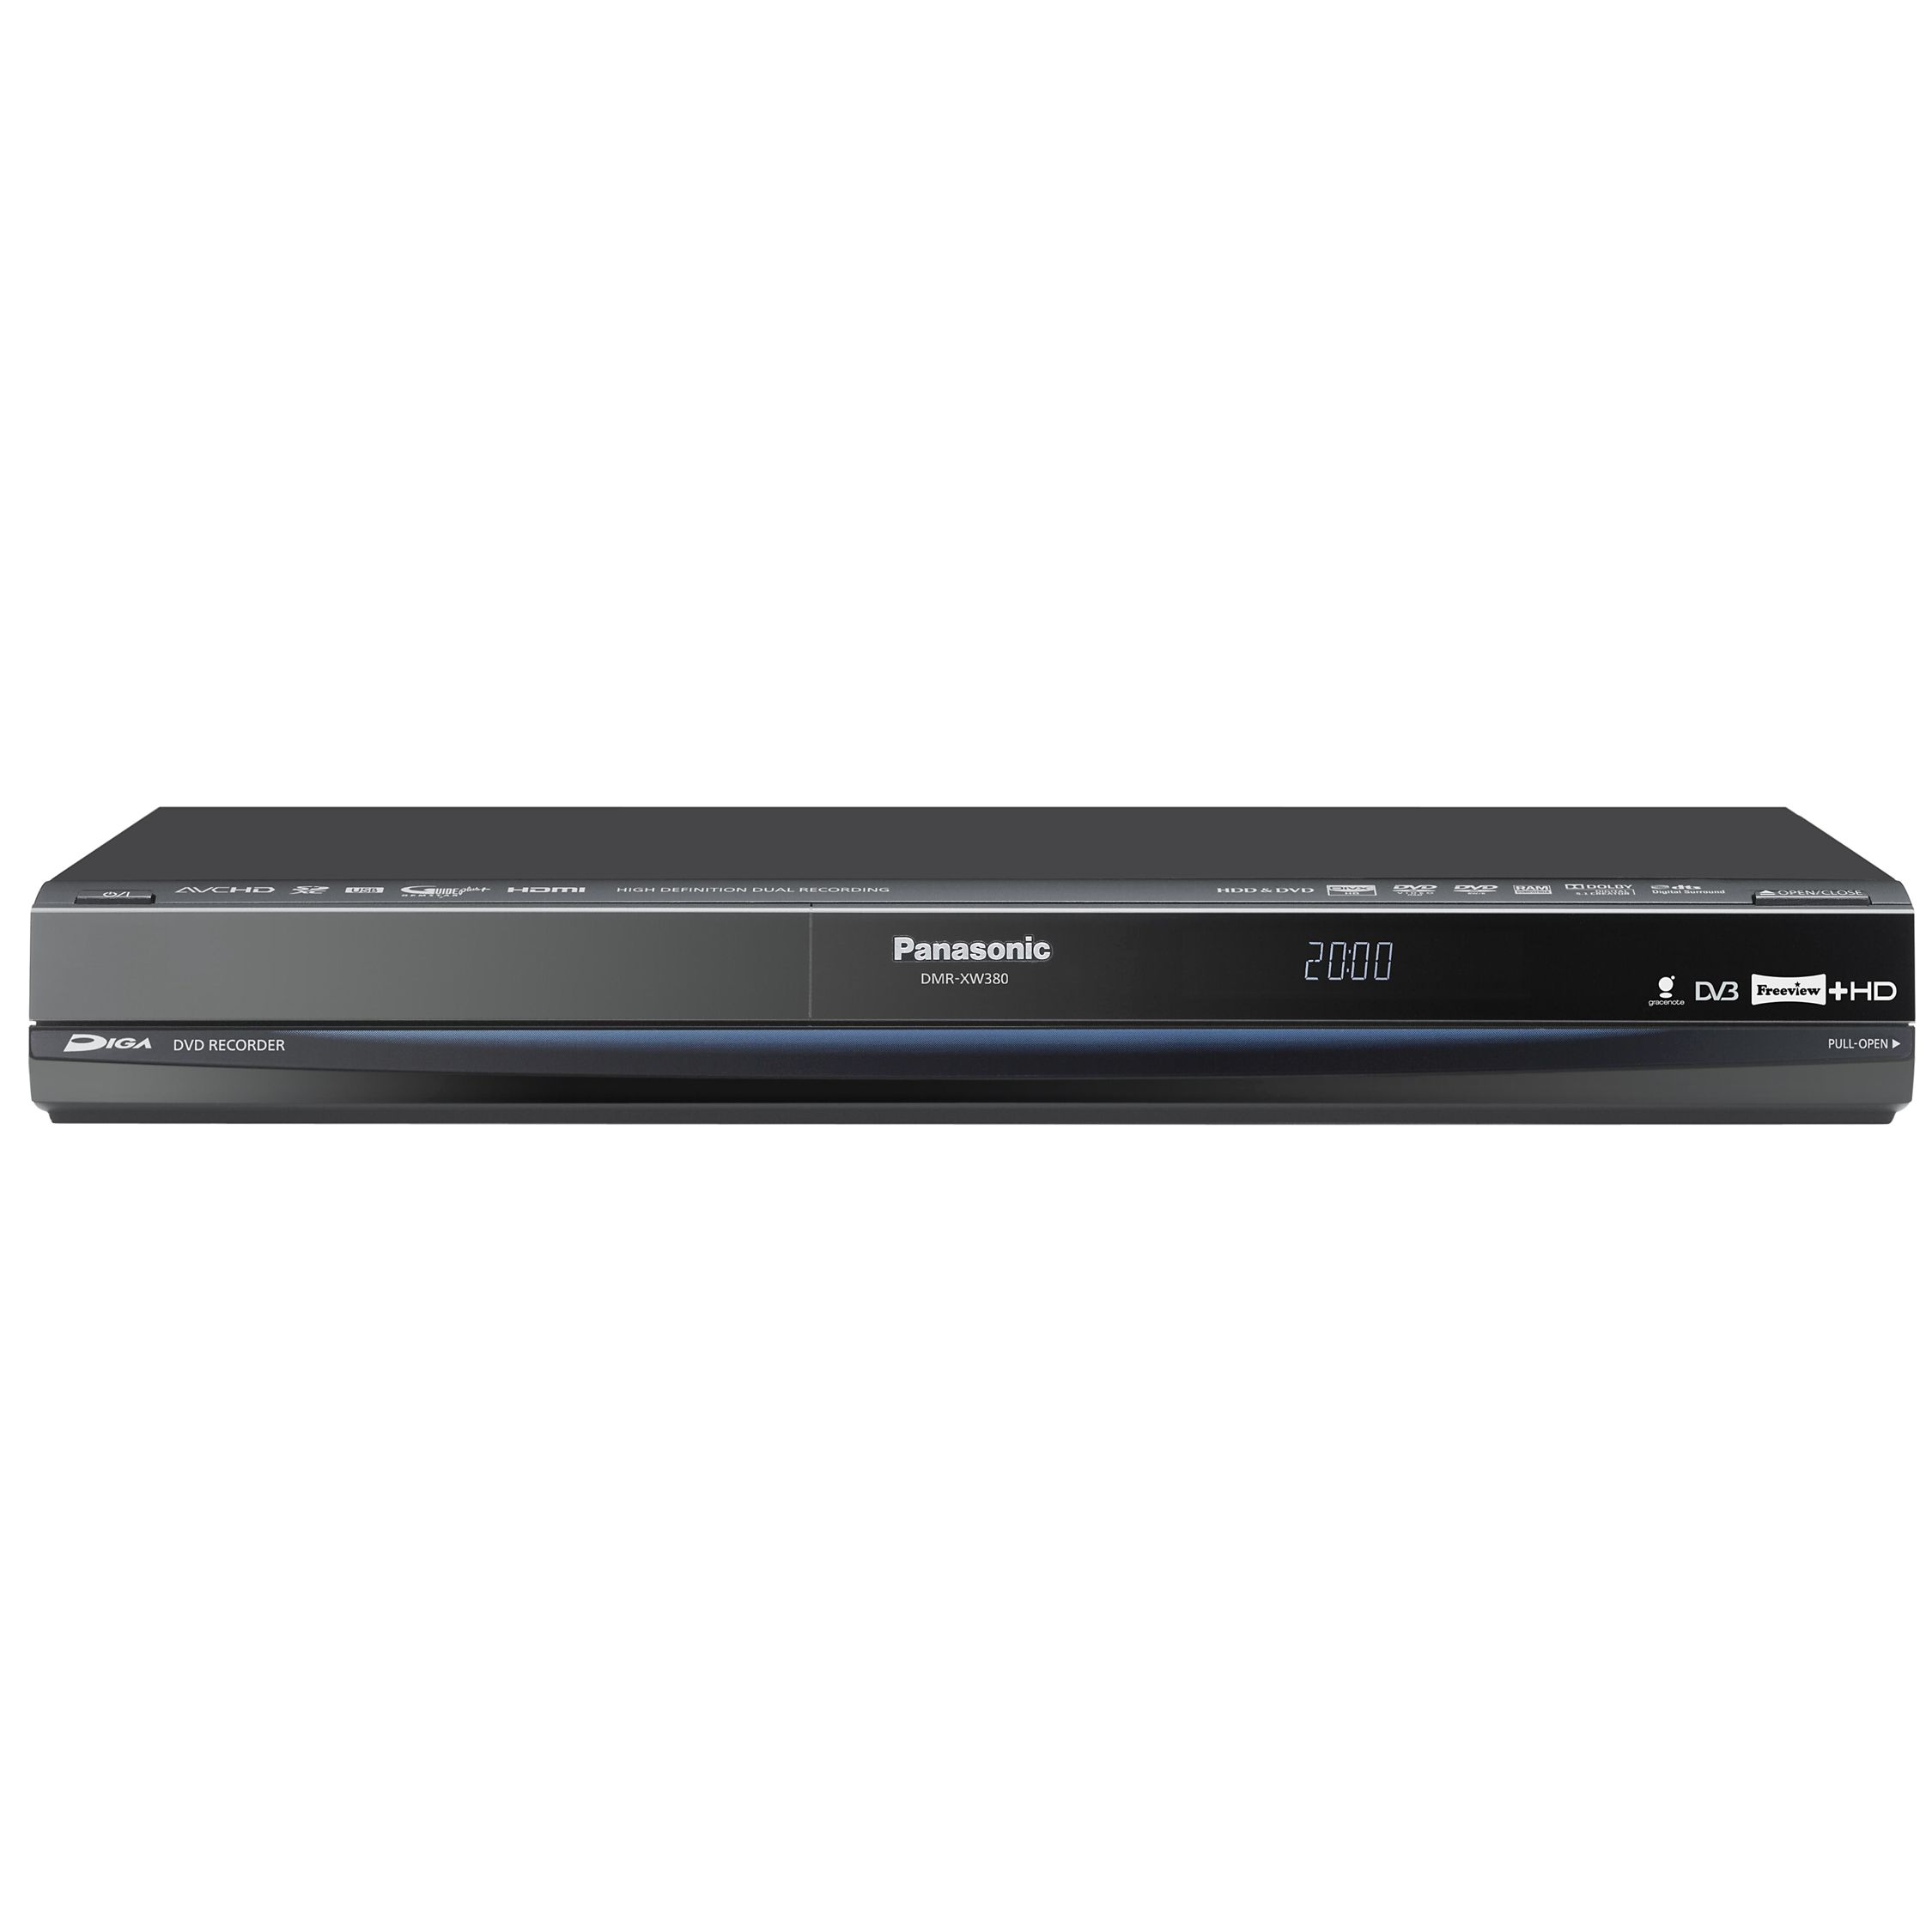 Panasonic DMR-XW380 DVD/HDD 250GB Digital Recorder with Built-in Freeview+ HD at John Lewis